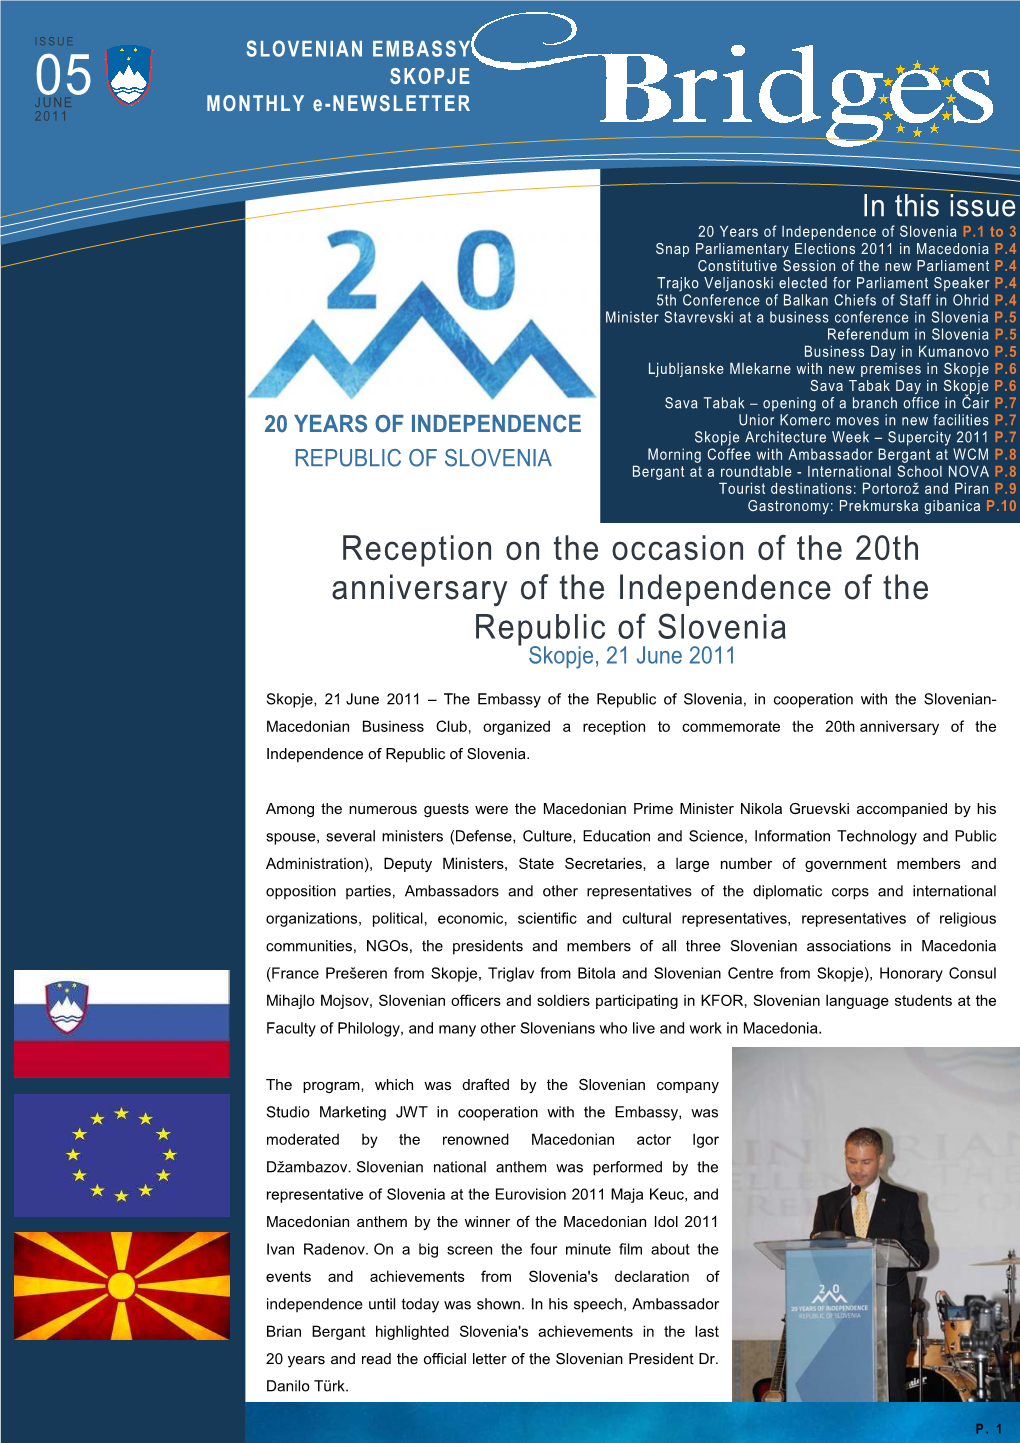 Reception on the Occasion of the 20Th Anniversary of the Independence of the Republic of Slovenia